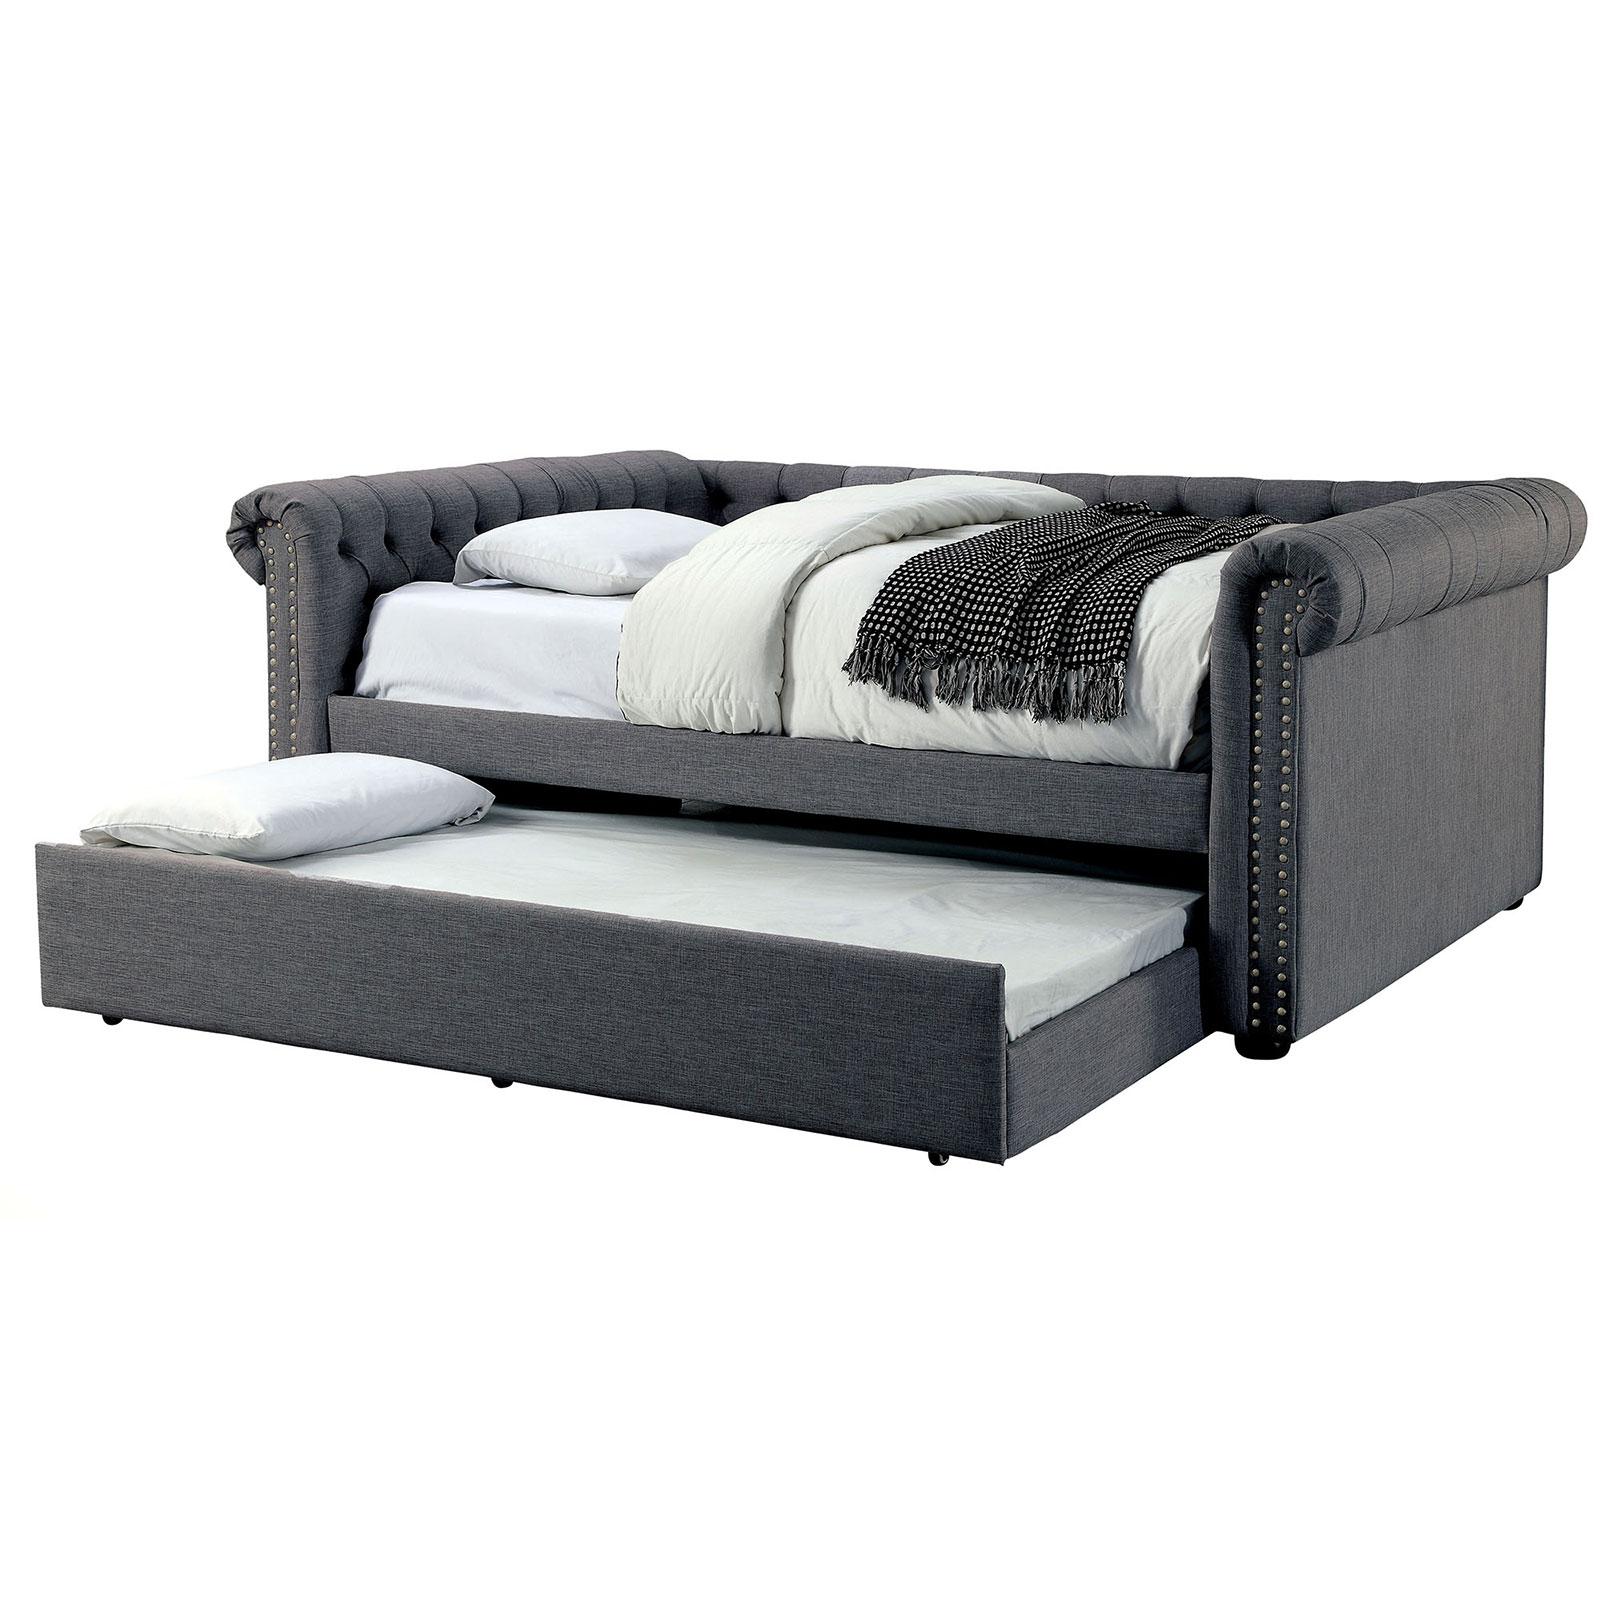 Furniture of America LEANNA CM1027GY-Q Daybed